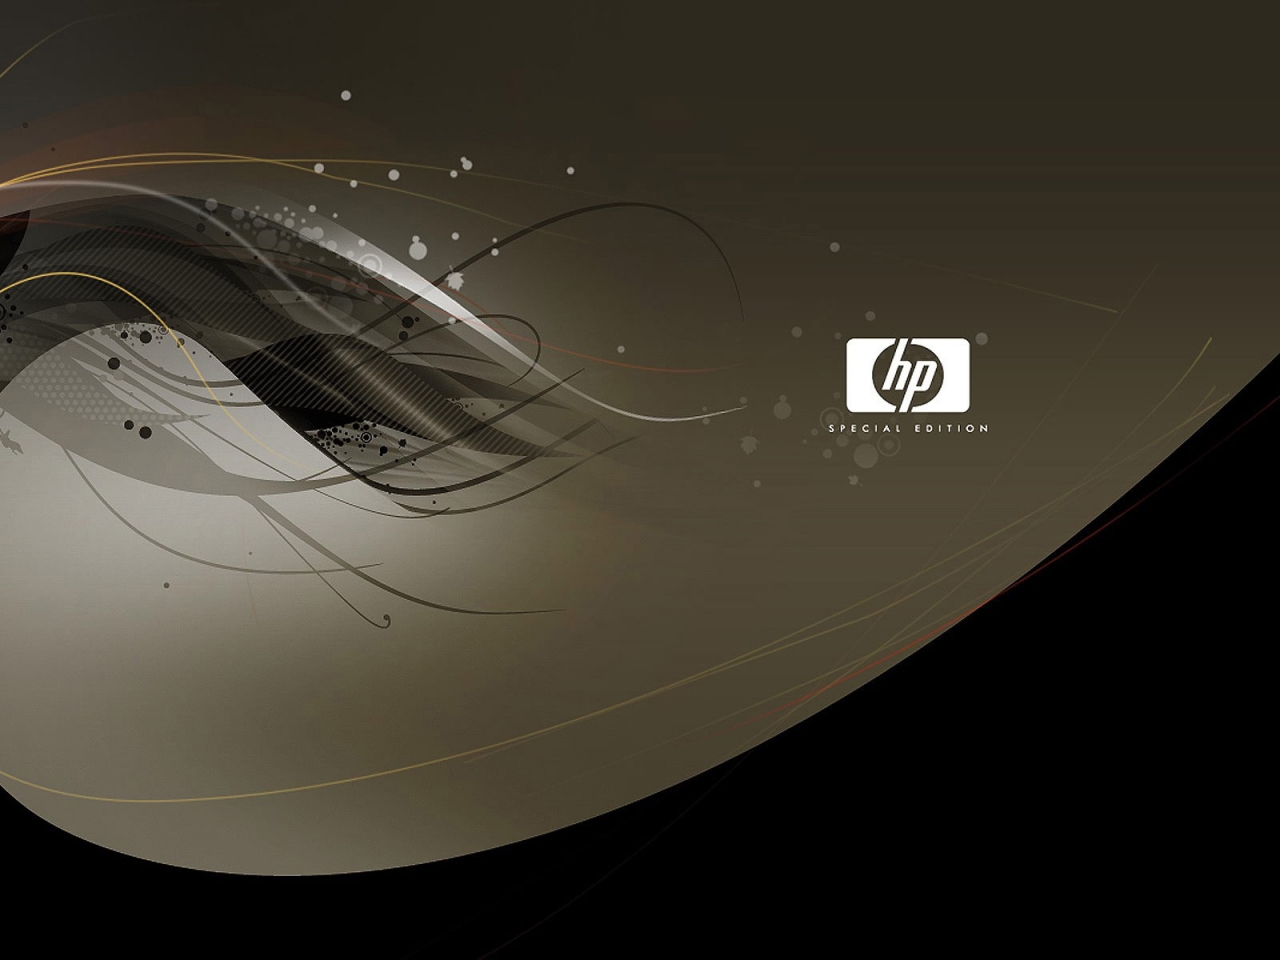 HP Special Edition for 1280 x 960 resolution